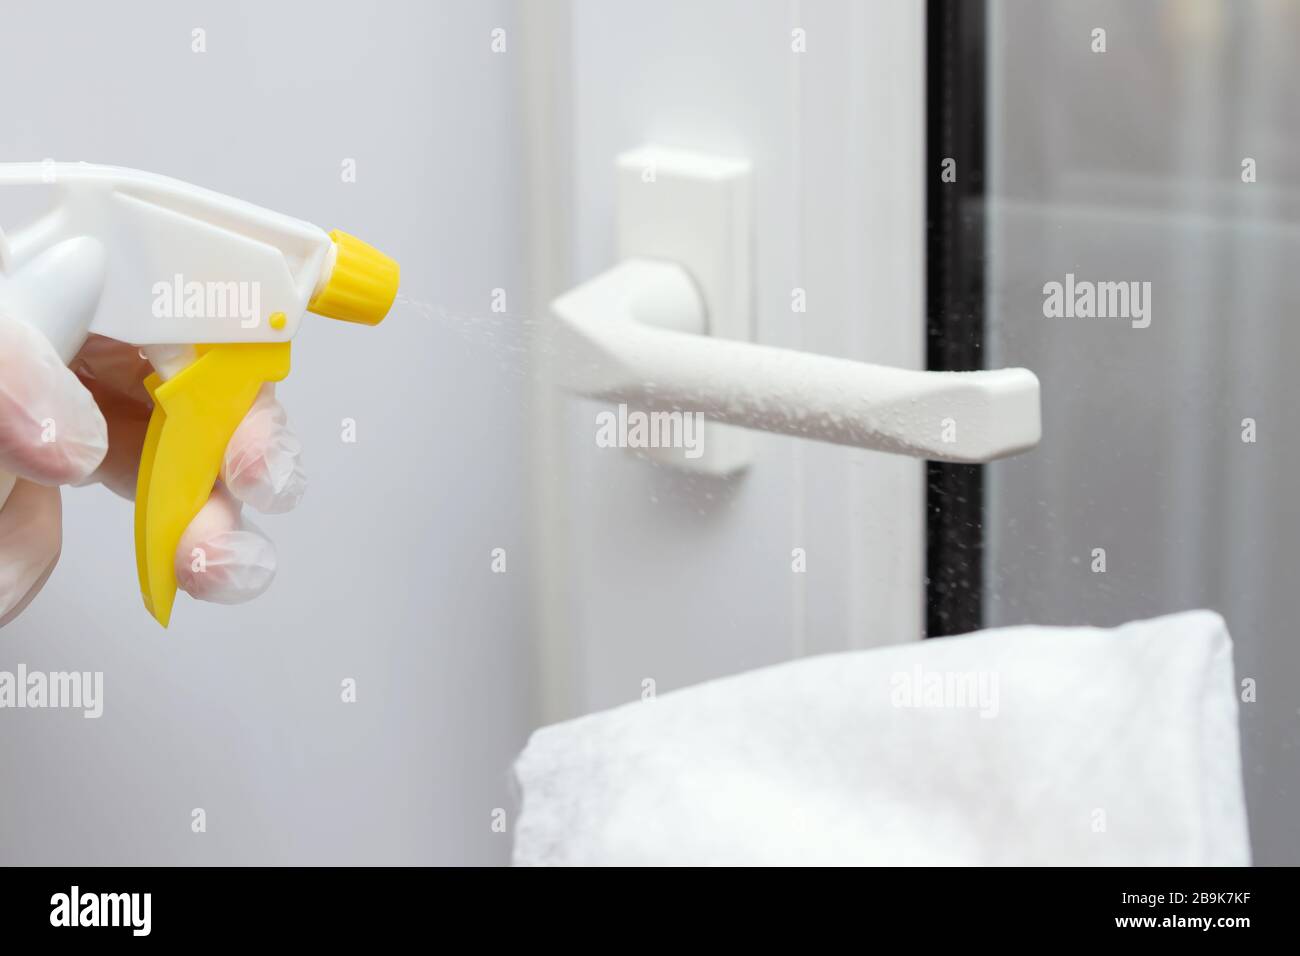 Actions to prevent the spread of coronavirus KOVID-19, disinfection of the door handle. Hand in gloves sprays disinfectant liquid on the handle Stock Photo